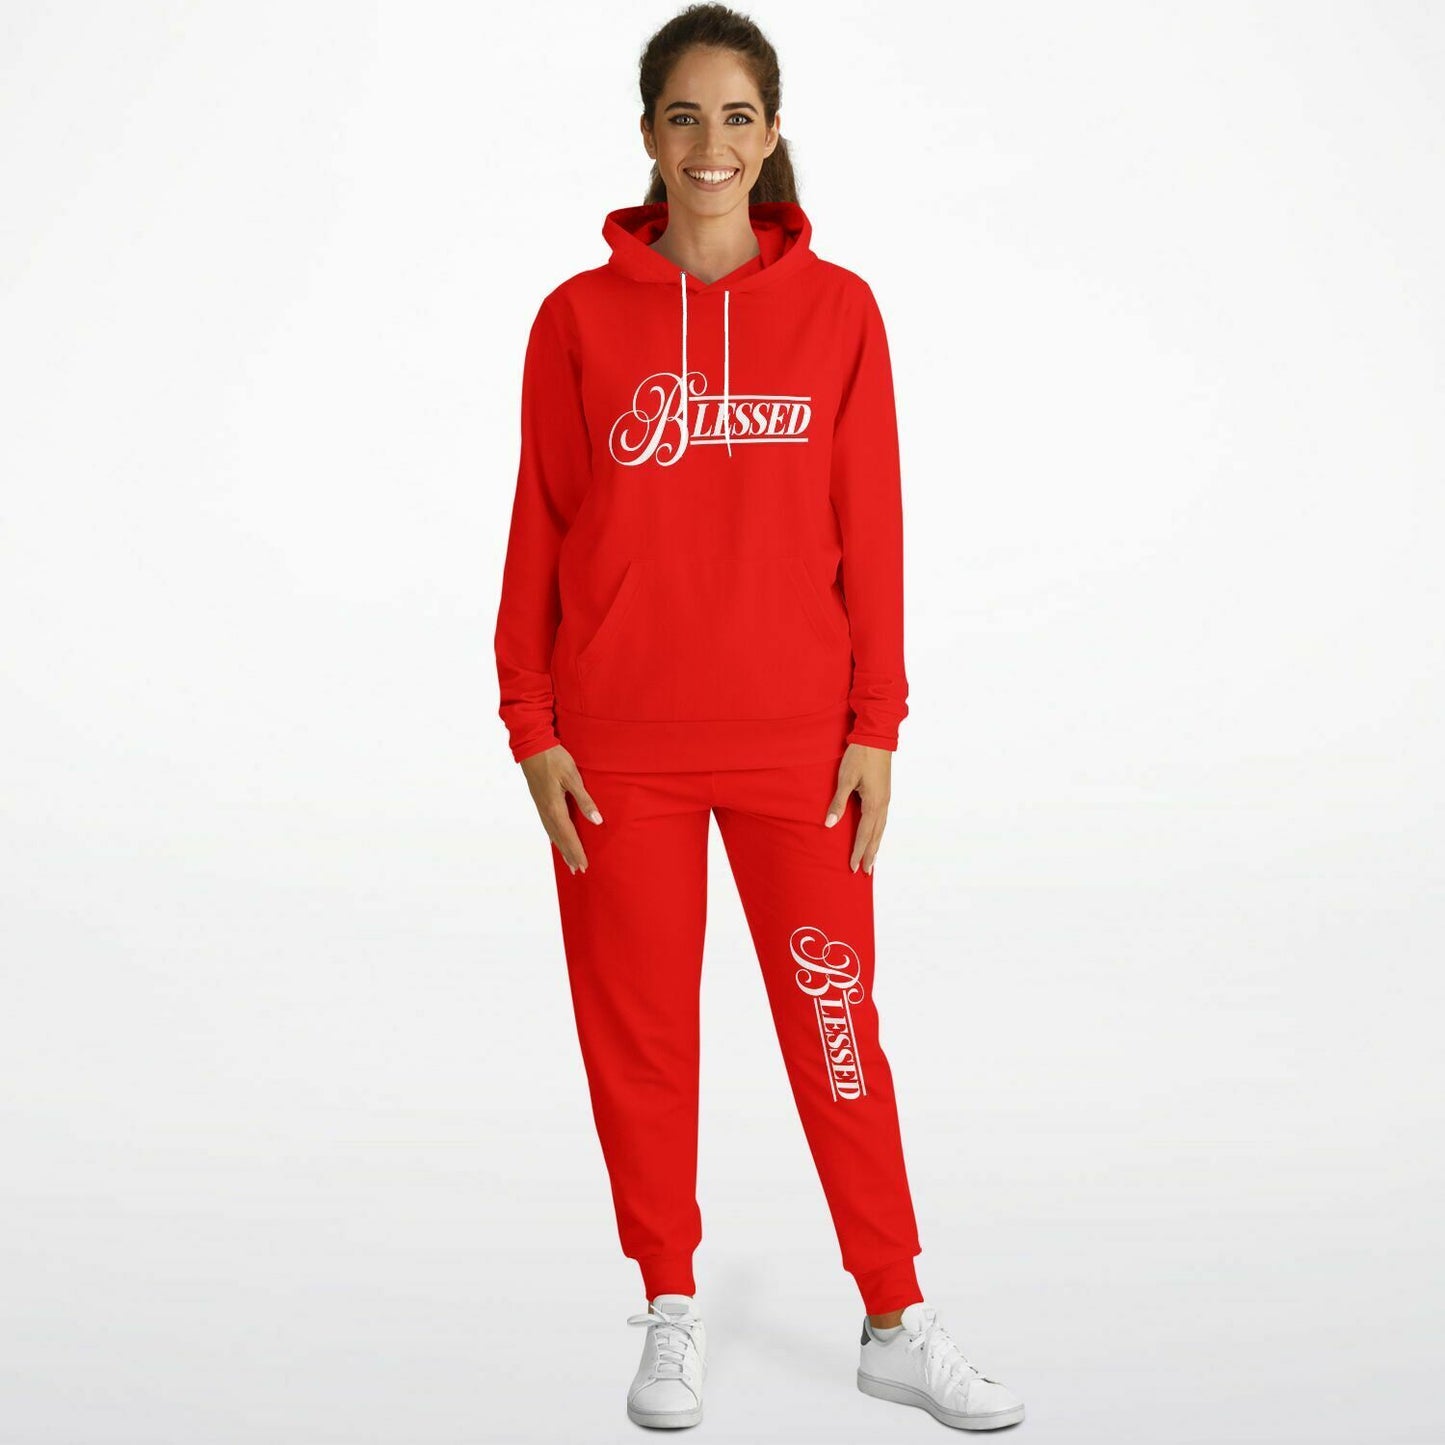 Blessed Sweatsuit - Red